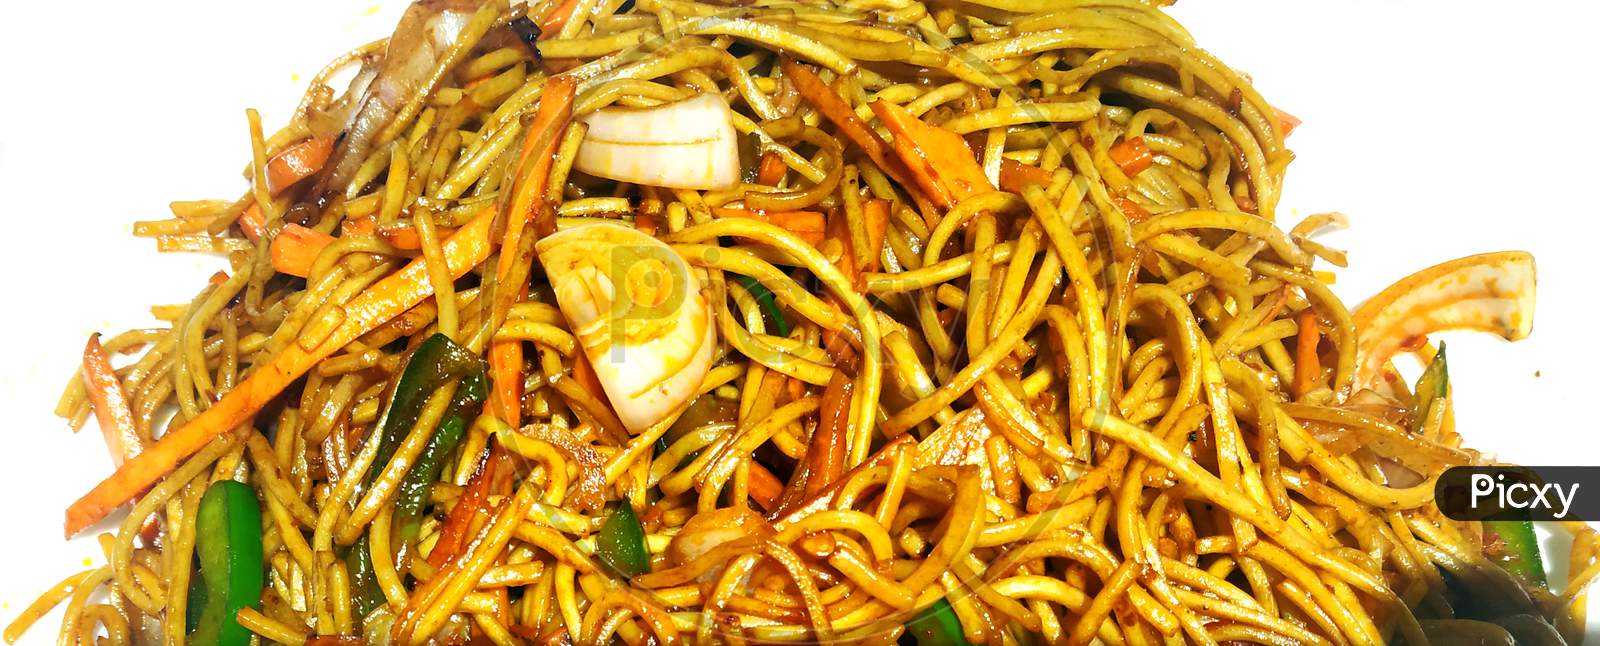 Schezwan Noodles Or Vegetable Hakka Noodles Or Chow Mein Is A Popular Indo-Chinese Recipes, Served In A Bowl Or Plate